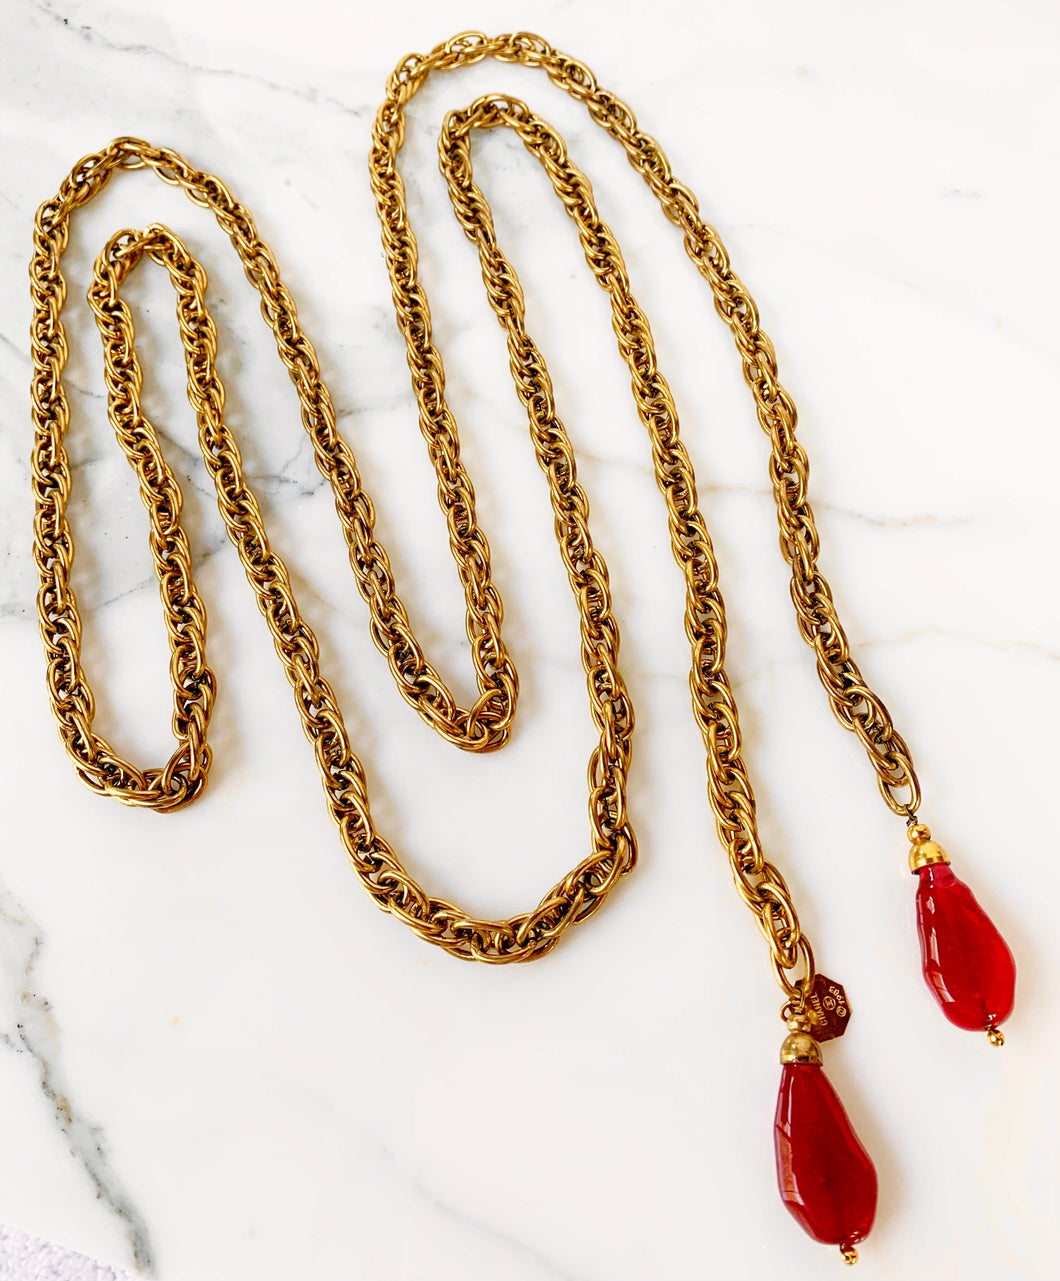 CHANEL 1983 IMPORTANT RED GRIPOIX GLASS NUGGETS LARIAT CHAIN NECKLACE